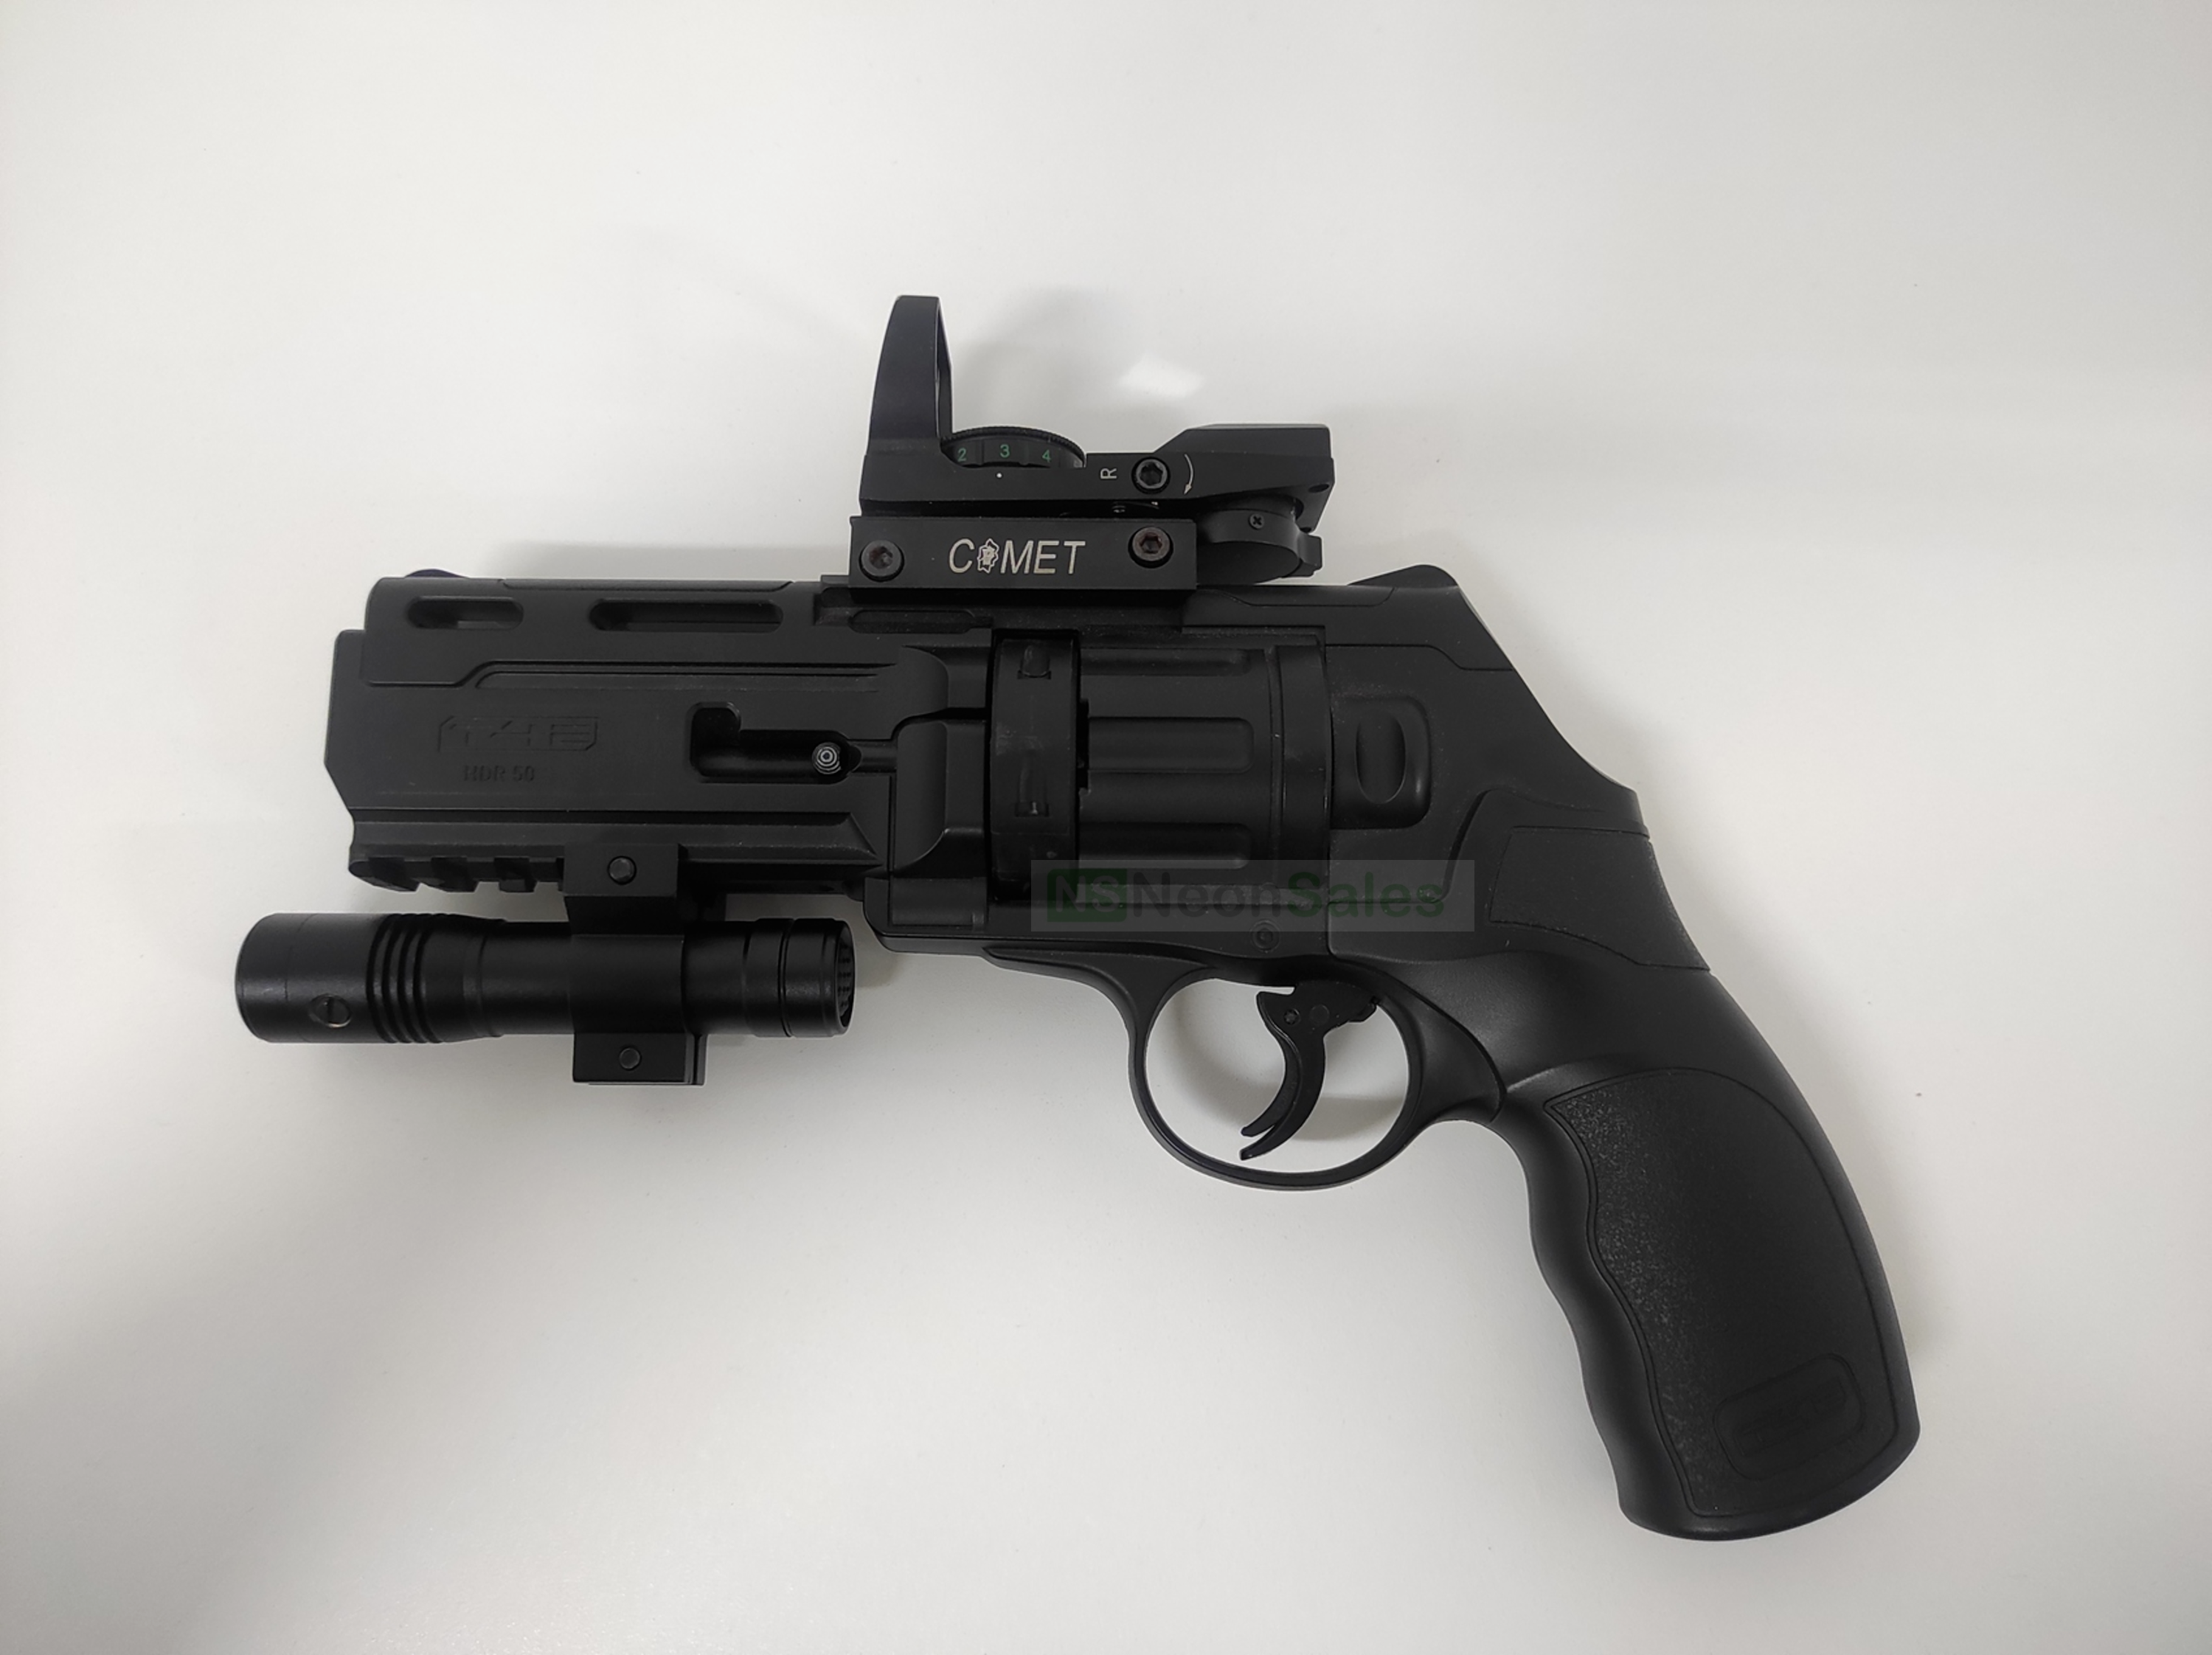 Guns & Markers - UMAREX 2.4758 HDR50 T4E REVOLVER .50CAL 11J COMBO was  listed for R2,960.00 on 23 Aug at 12:24 by NeonSales in South Africa  (ID:568299827)